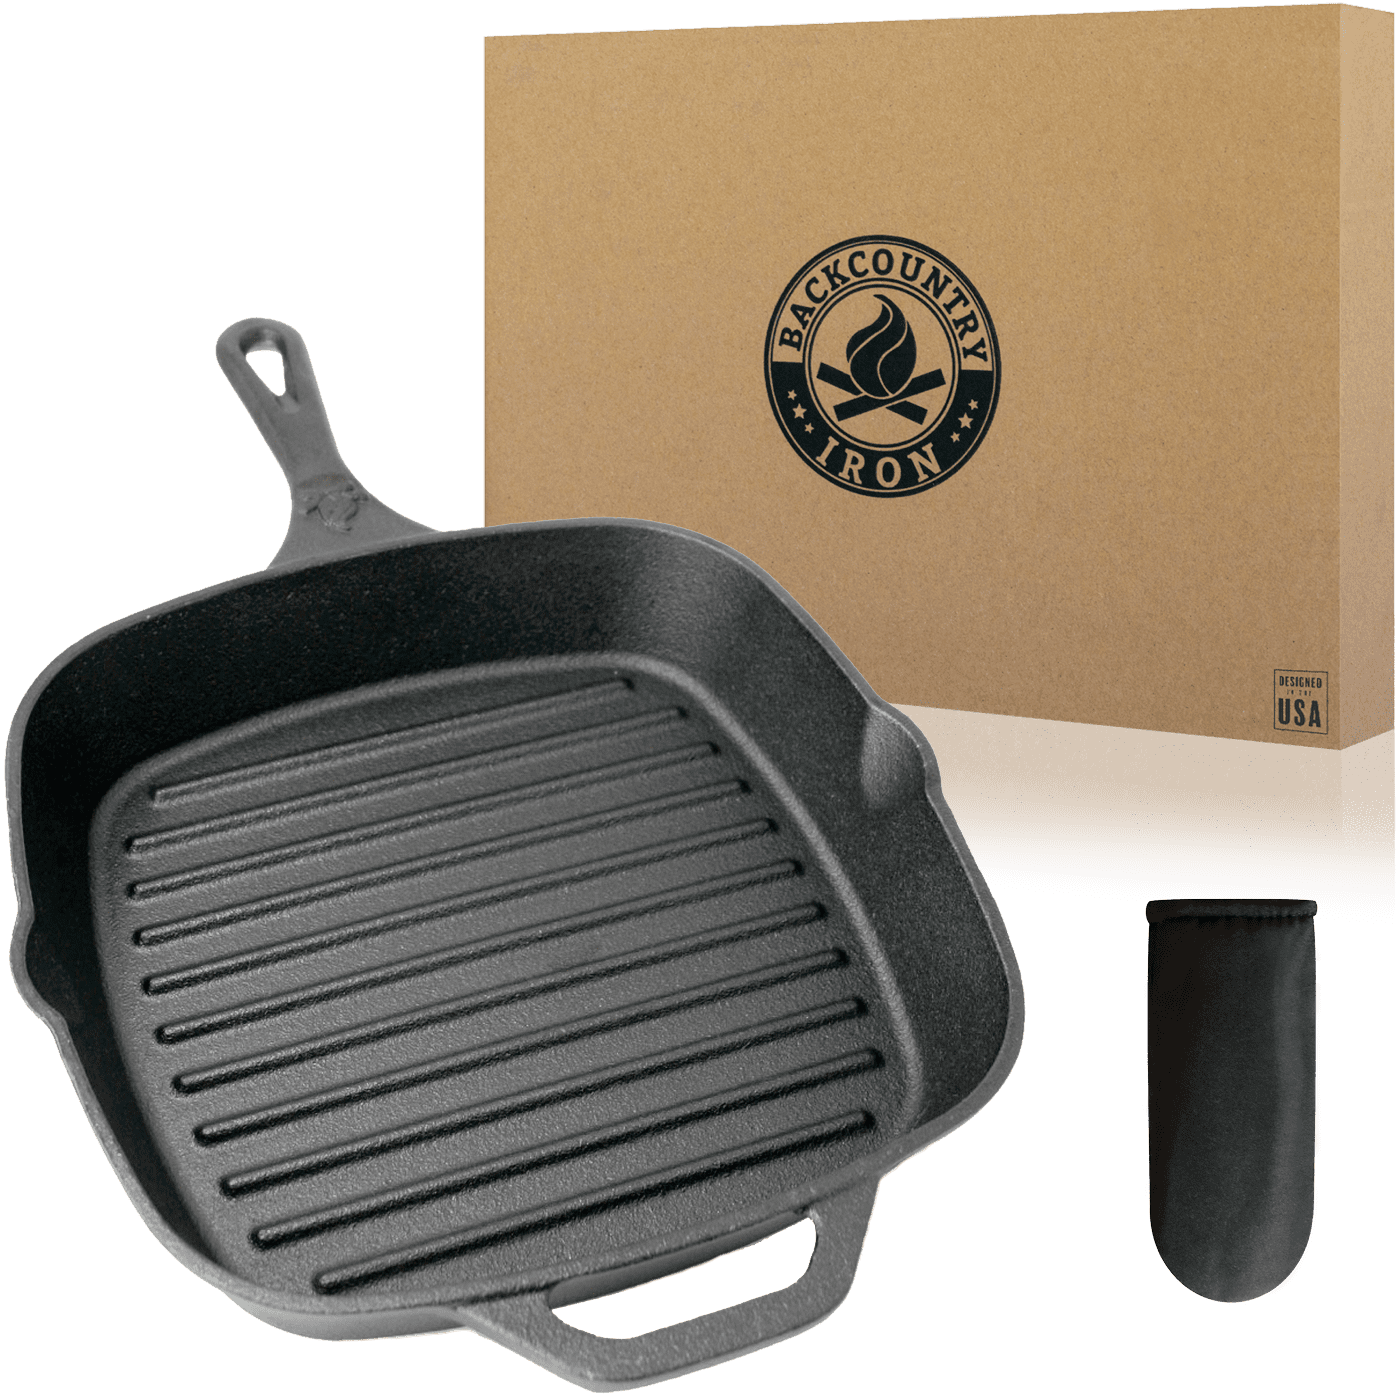 HexClad 12-Inch Griddle and BBQ Grill Pan Bundle Set